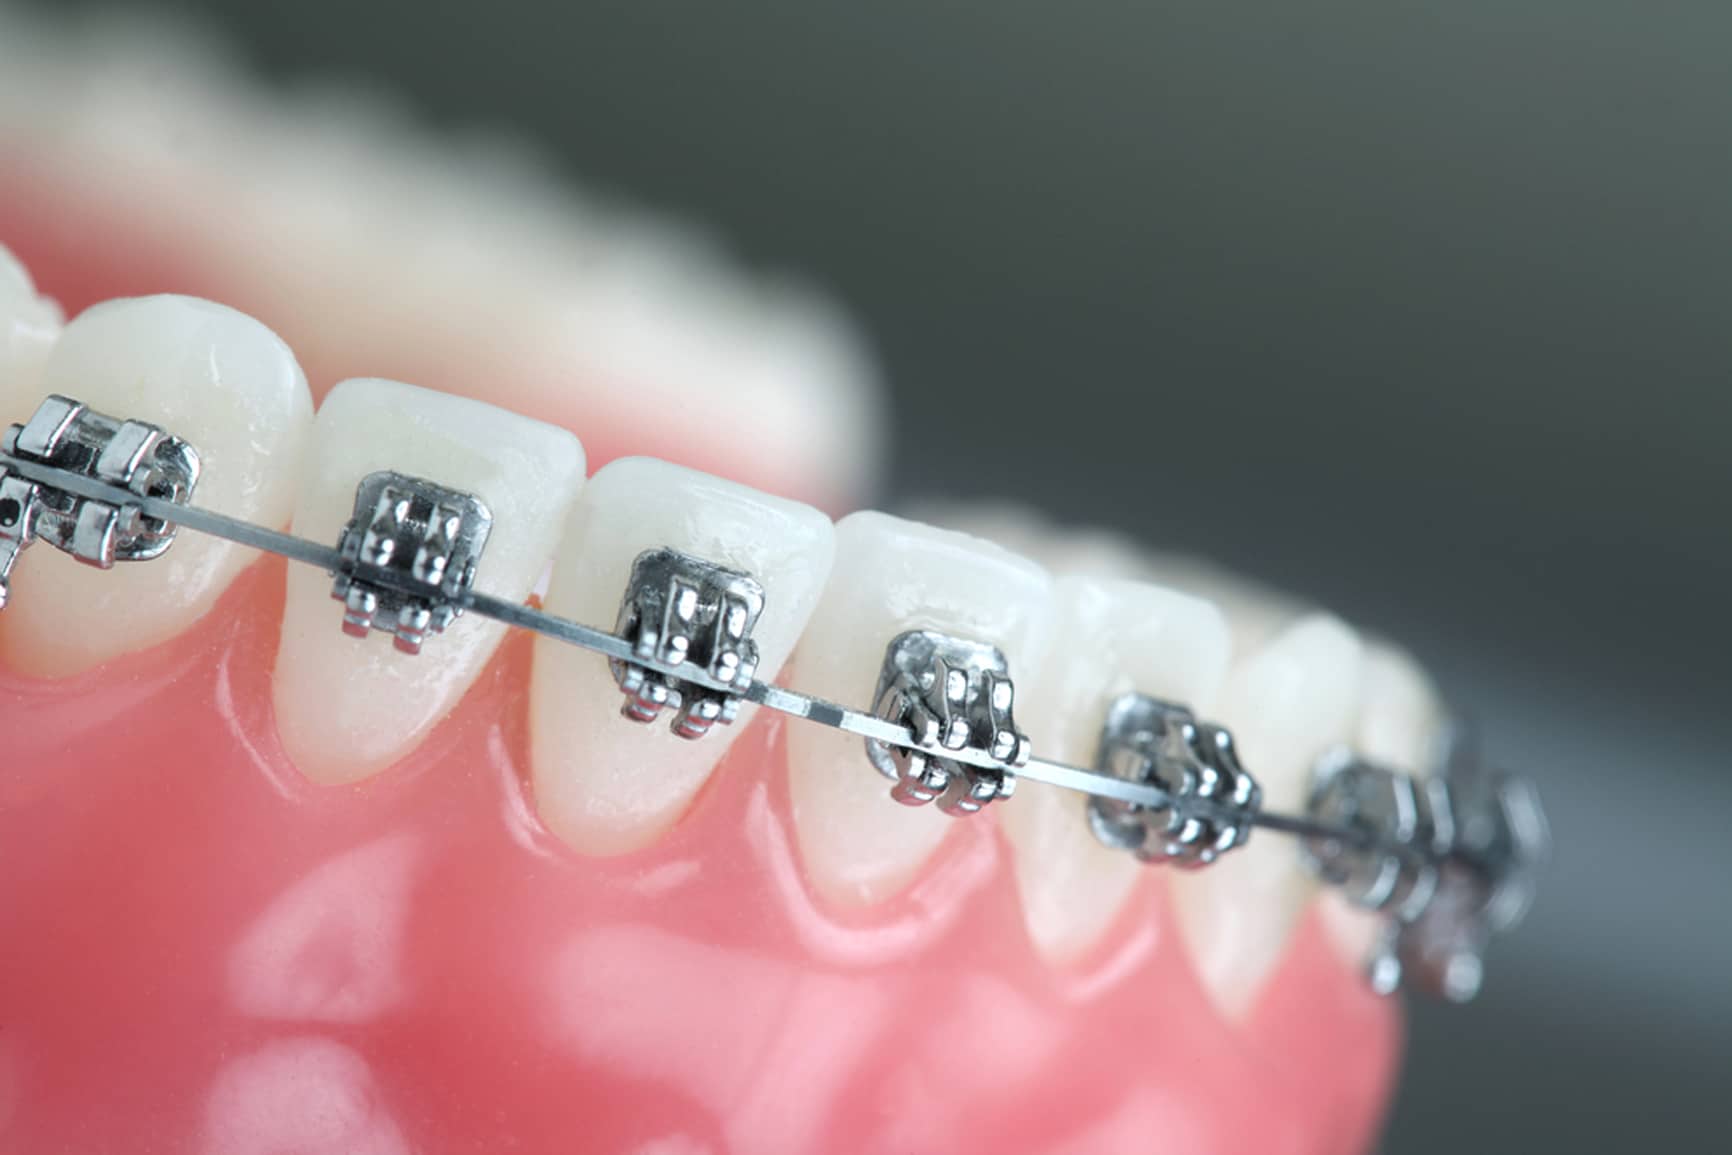 What to Expect and How to Care for Your New Braces in South Jordan Orthodontics Dr. Bill Willard Zurcher Orthodontist in Draper, UT 84020 West Jordan, UT 84084